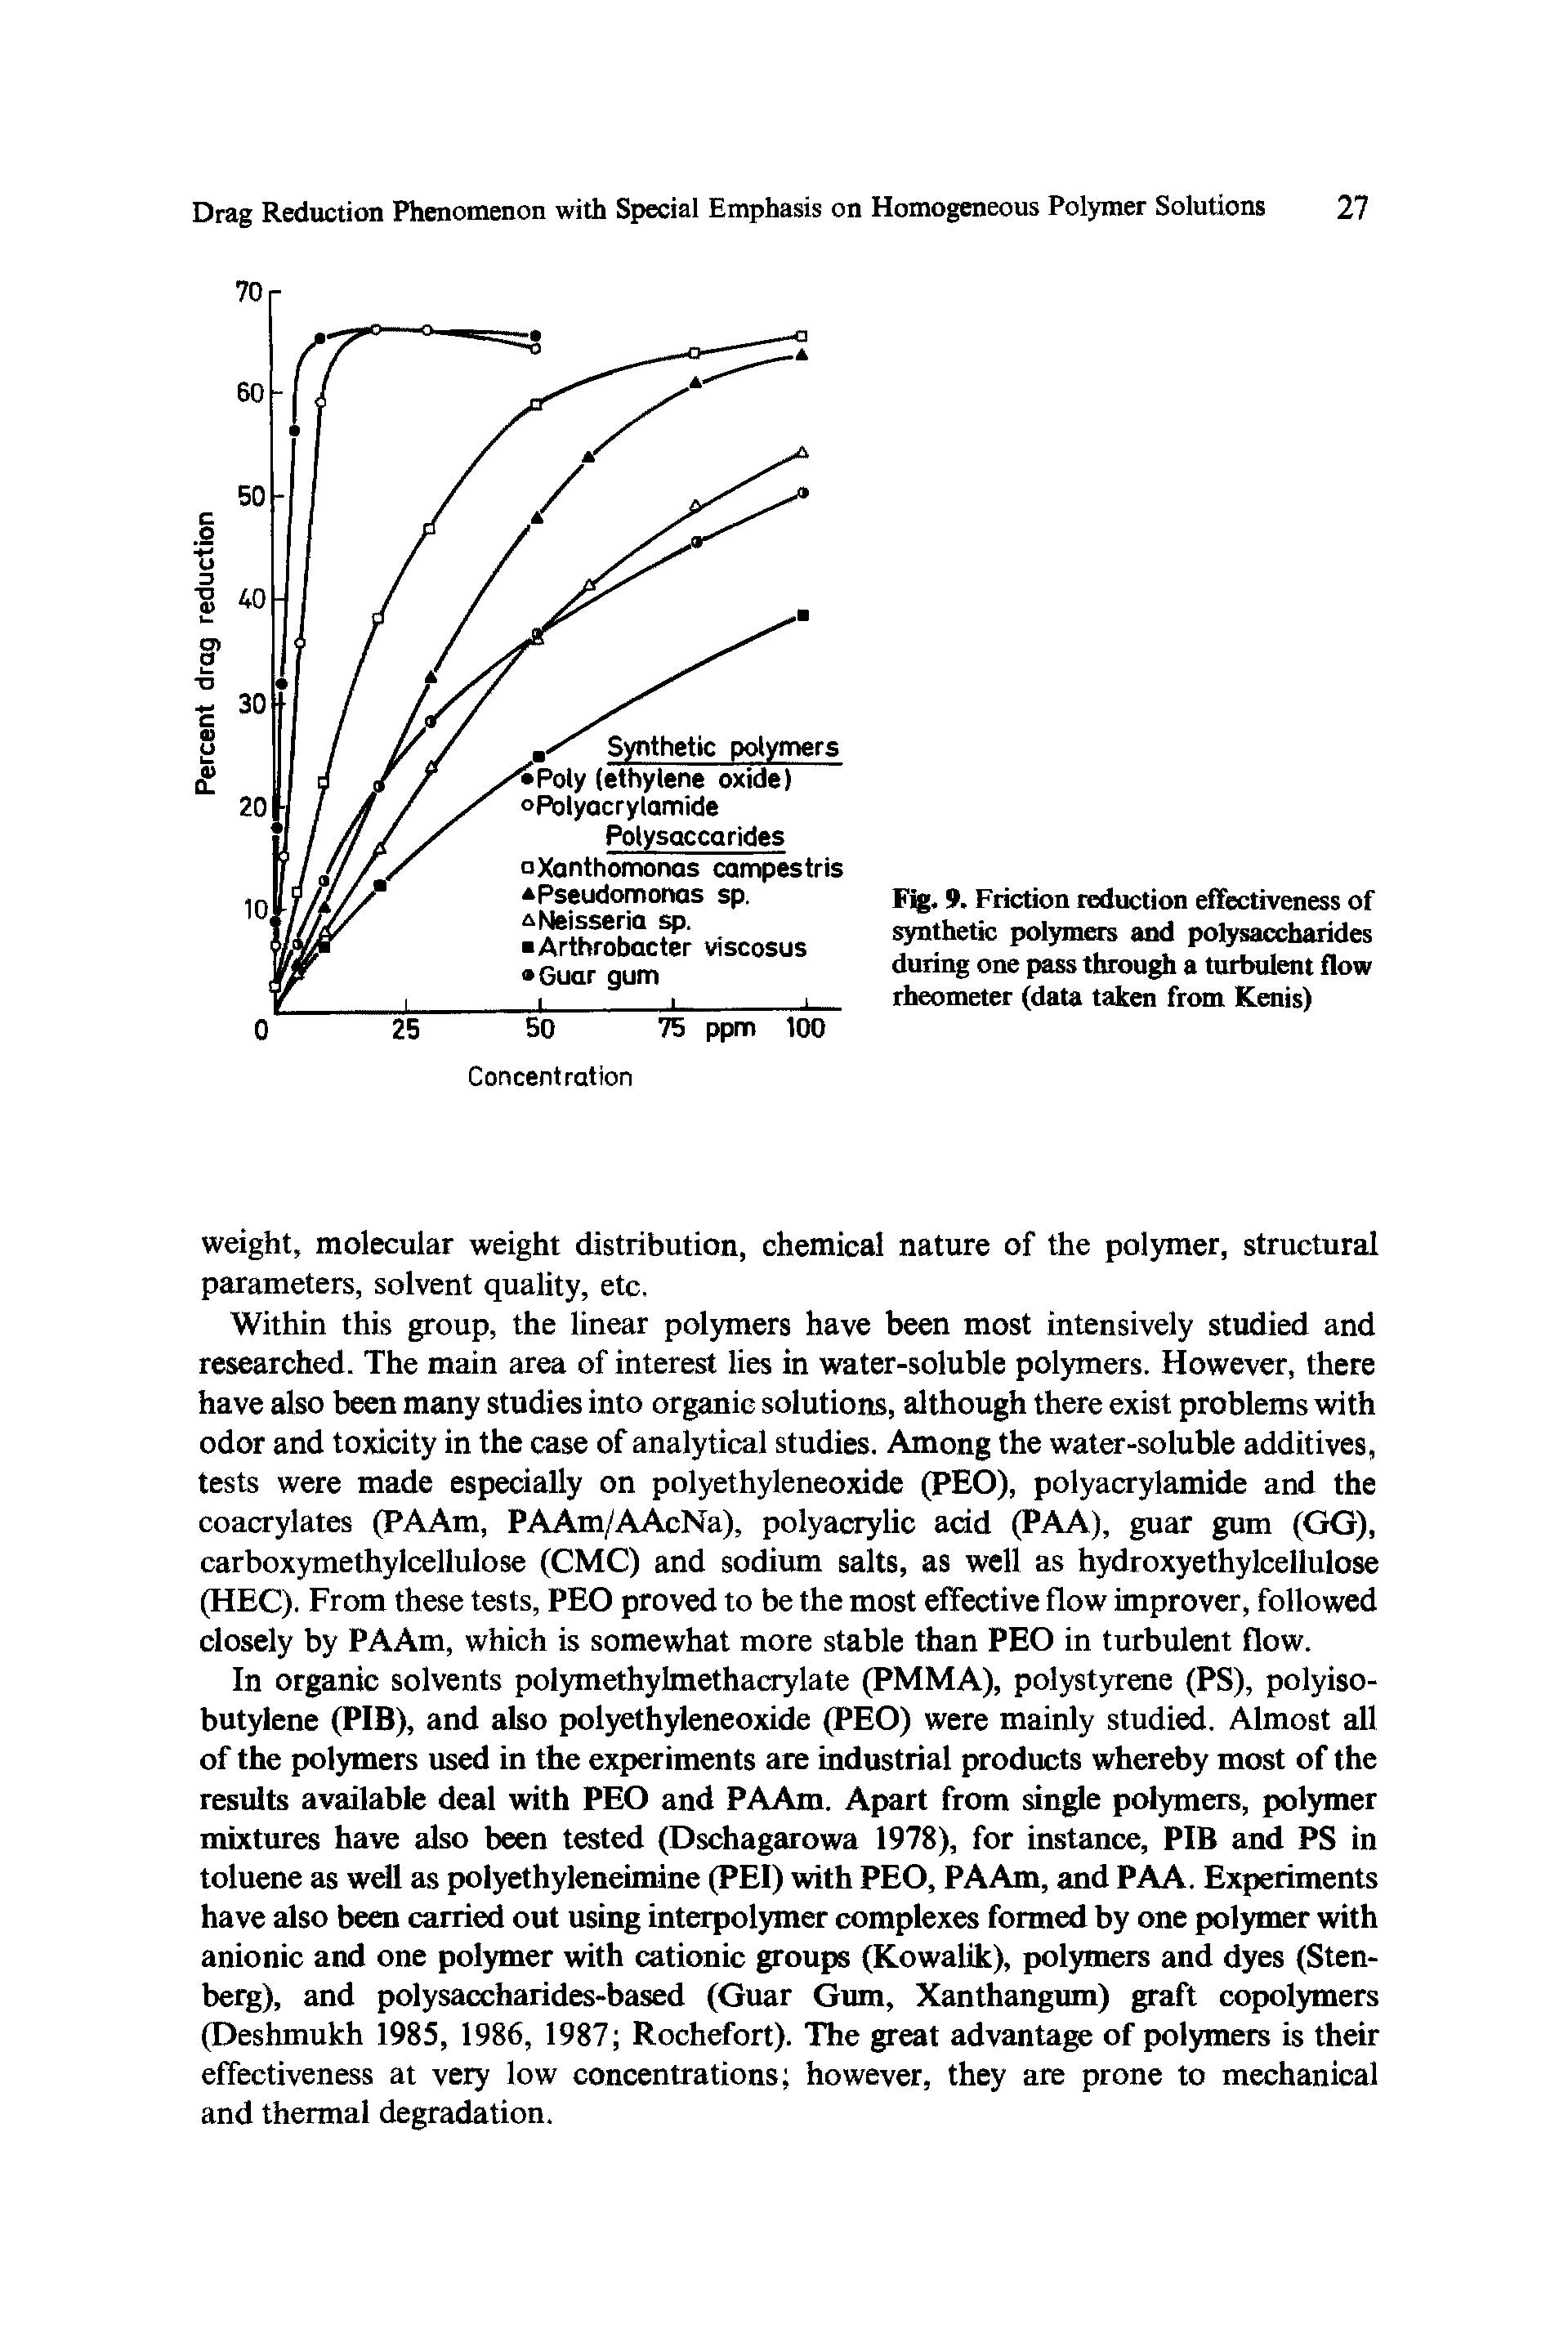 Fig. 9. Friction reduction effectiveness of synthetic polymers and polysaccharides during one pass through a turbulent flow rheometer (data taken from Kenis)...